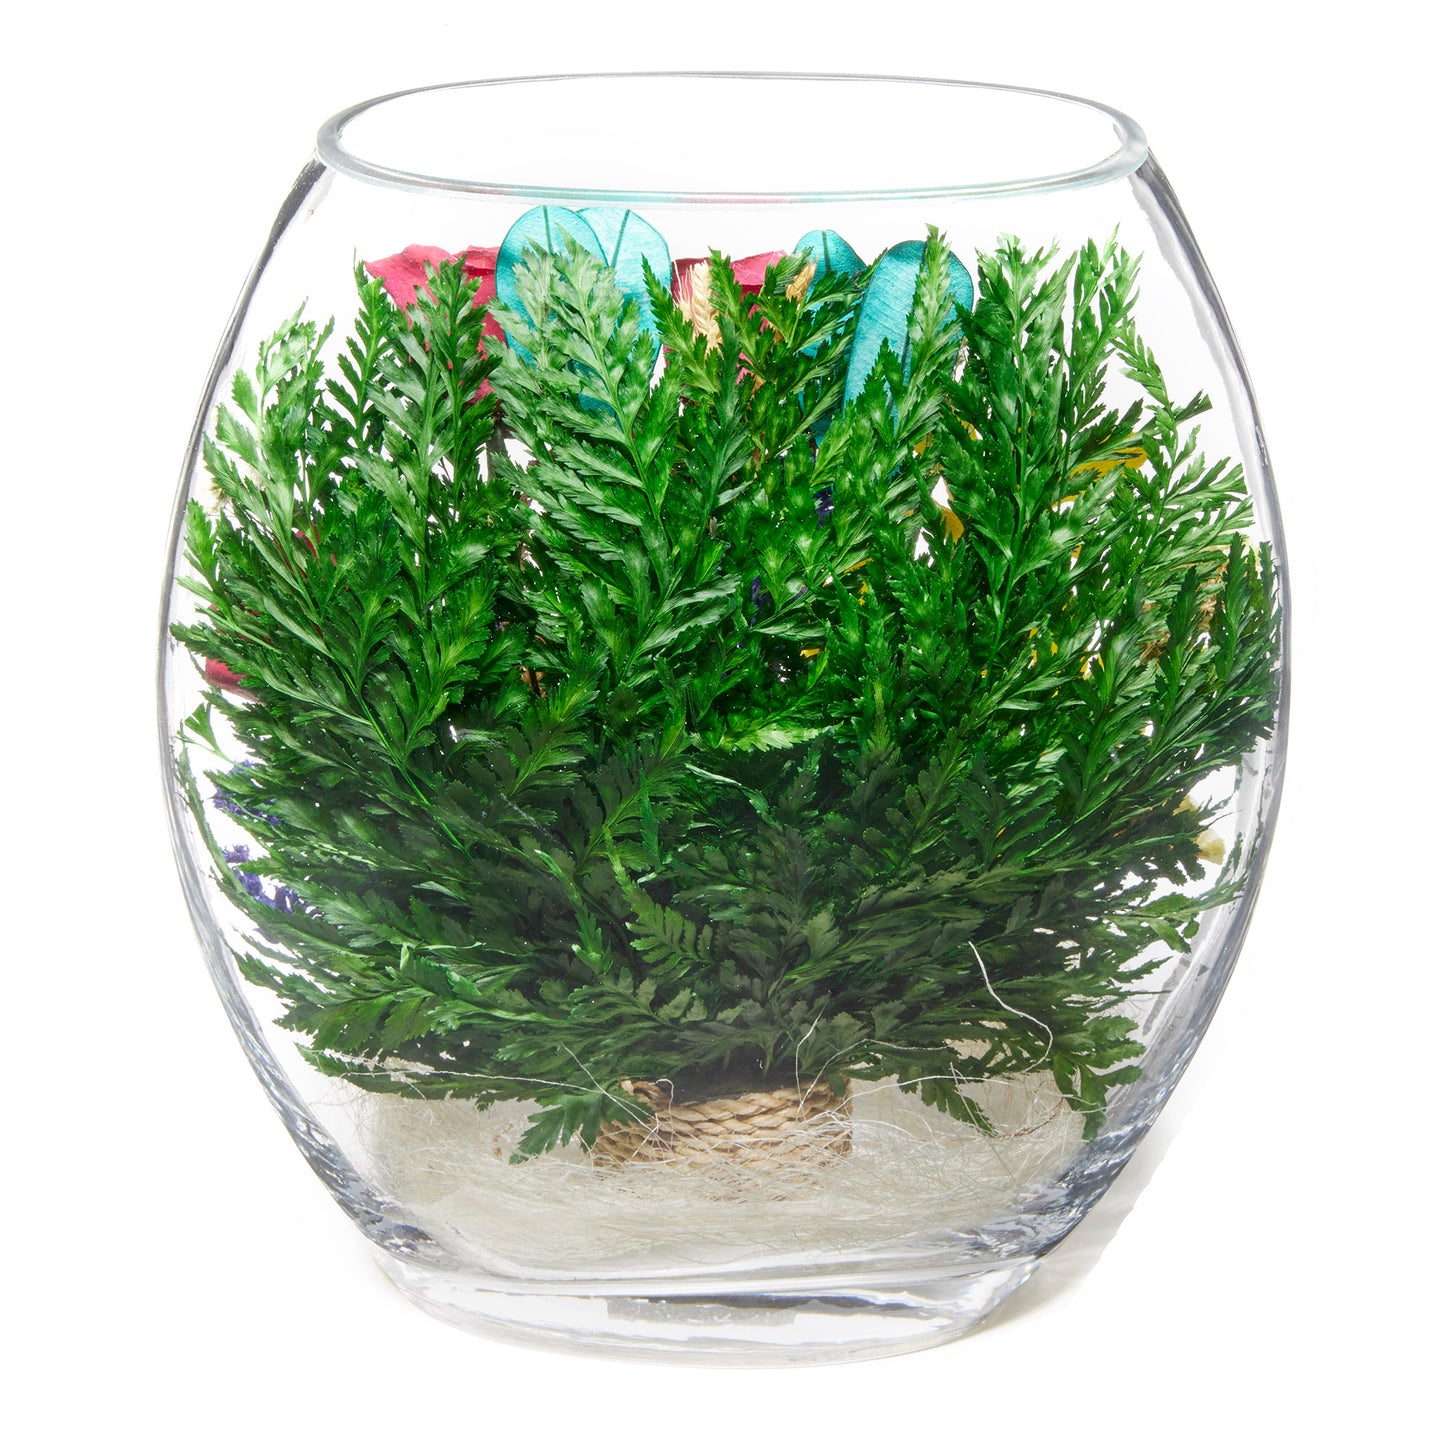 In Flores Veritas: Floral Harmony Rugby Vase - Lasts up to 5 Years - Elegant Gift for Any Occasion